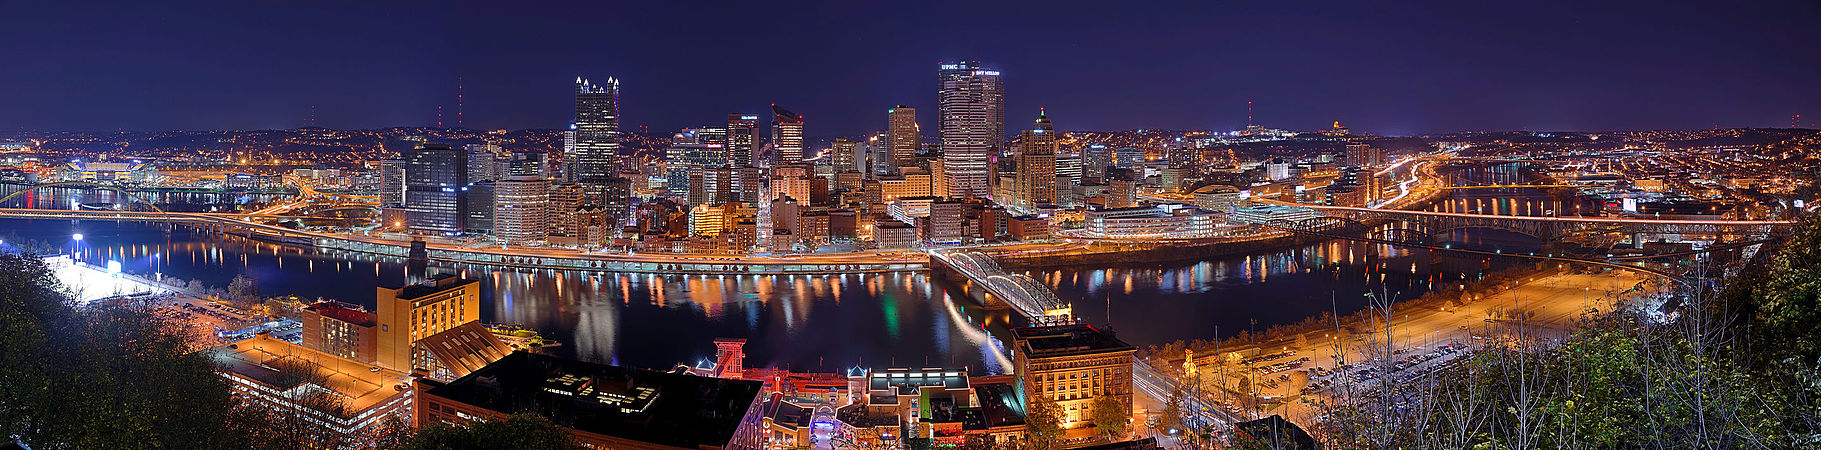 Pittsburgh Backgrounds, Compatible - PC, Mobile, Gadgets| 1821x450 px